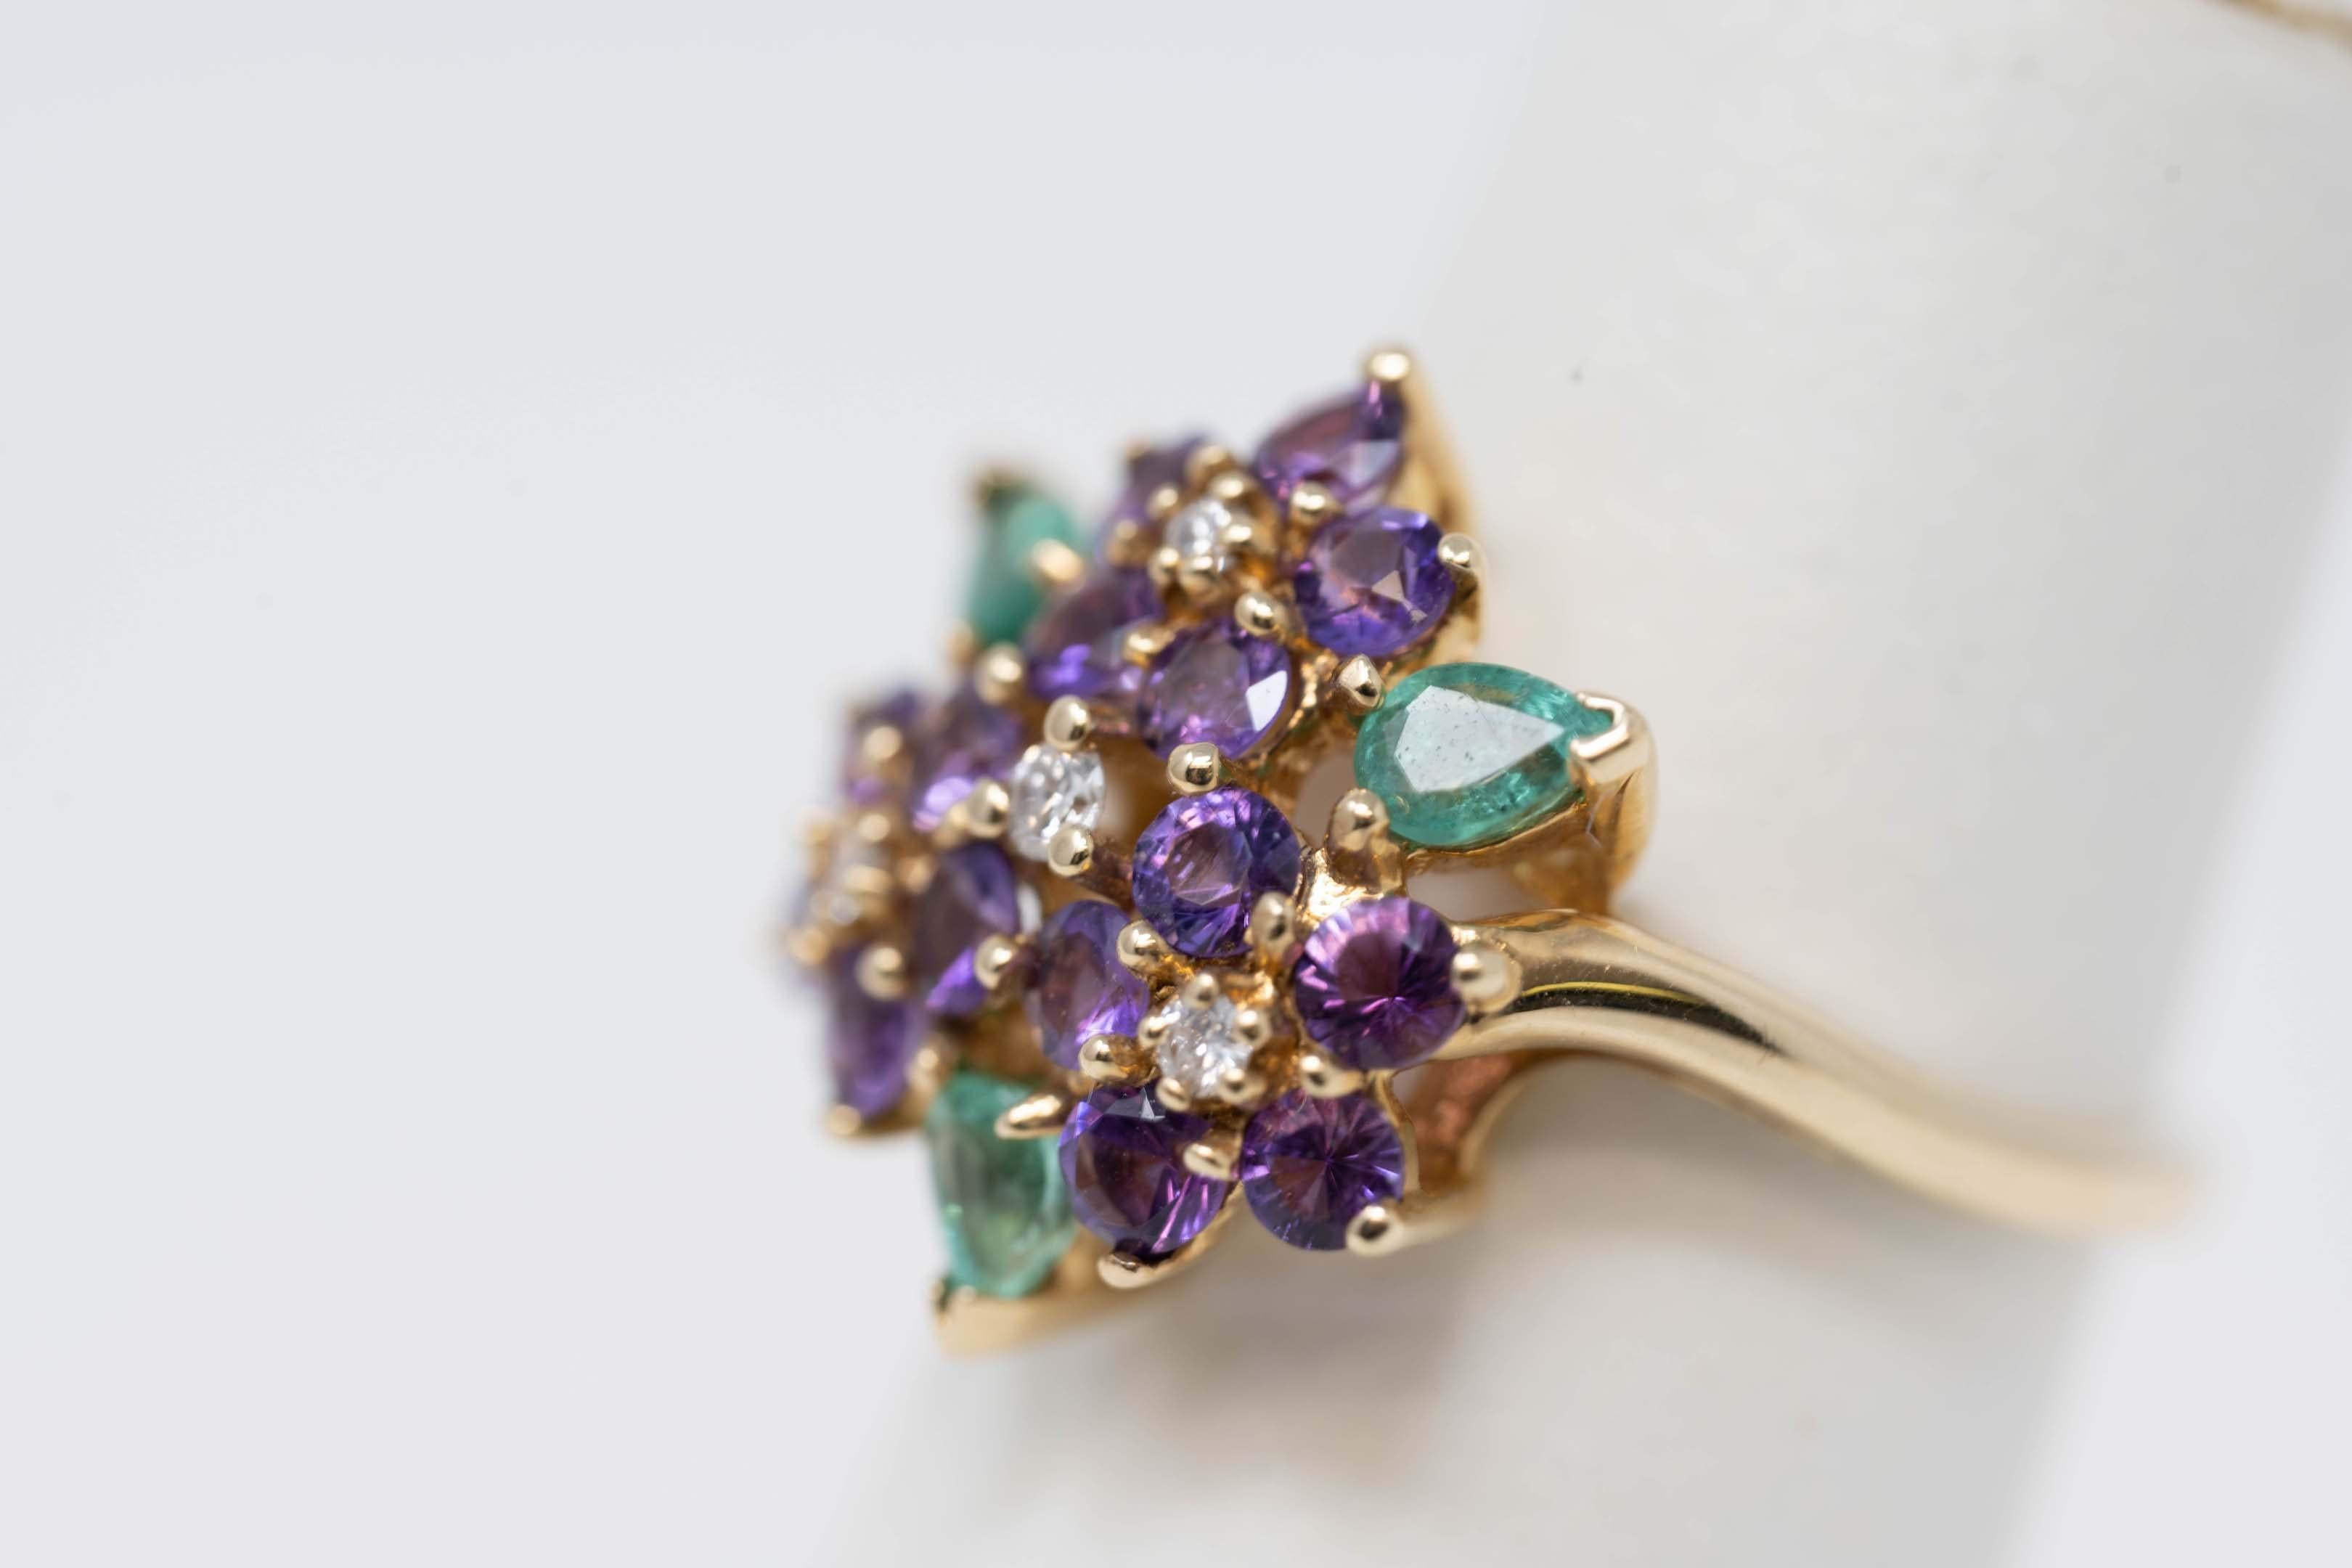 House of Igor Carl Faberge for Franklin Mint 14k yellow gold ring, size 5 1/2. With 4 diamonds, 3 pear shaped emeralds and 15 amethyst gemstones. Stamped inside 92-FM and Faberge mark. Weighs 4.3 grams.
